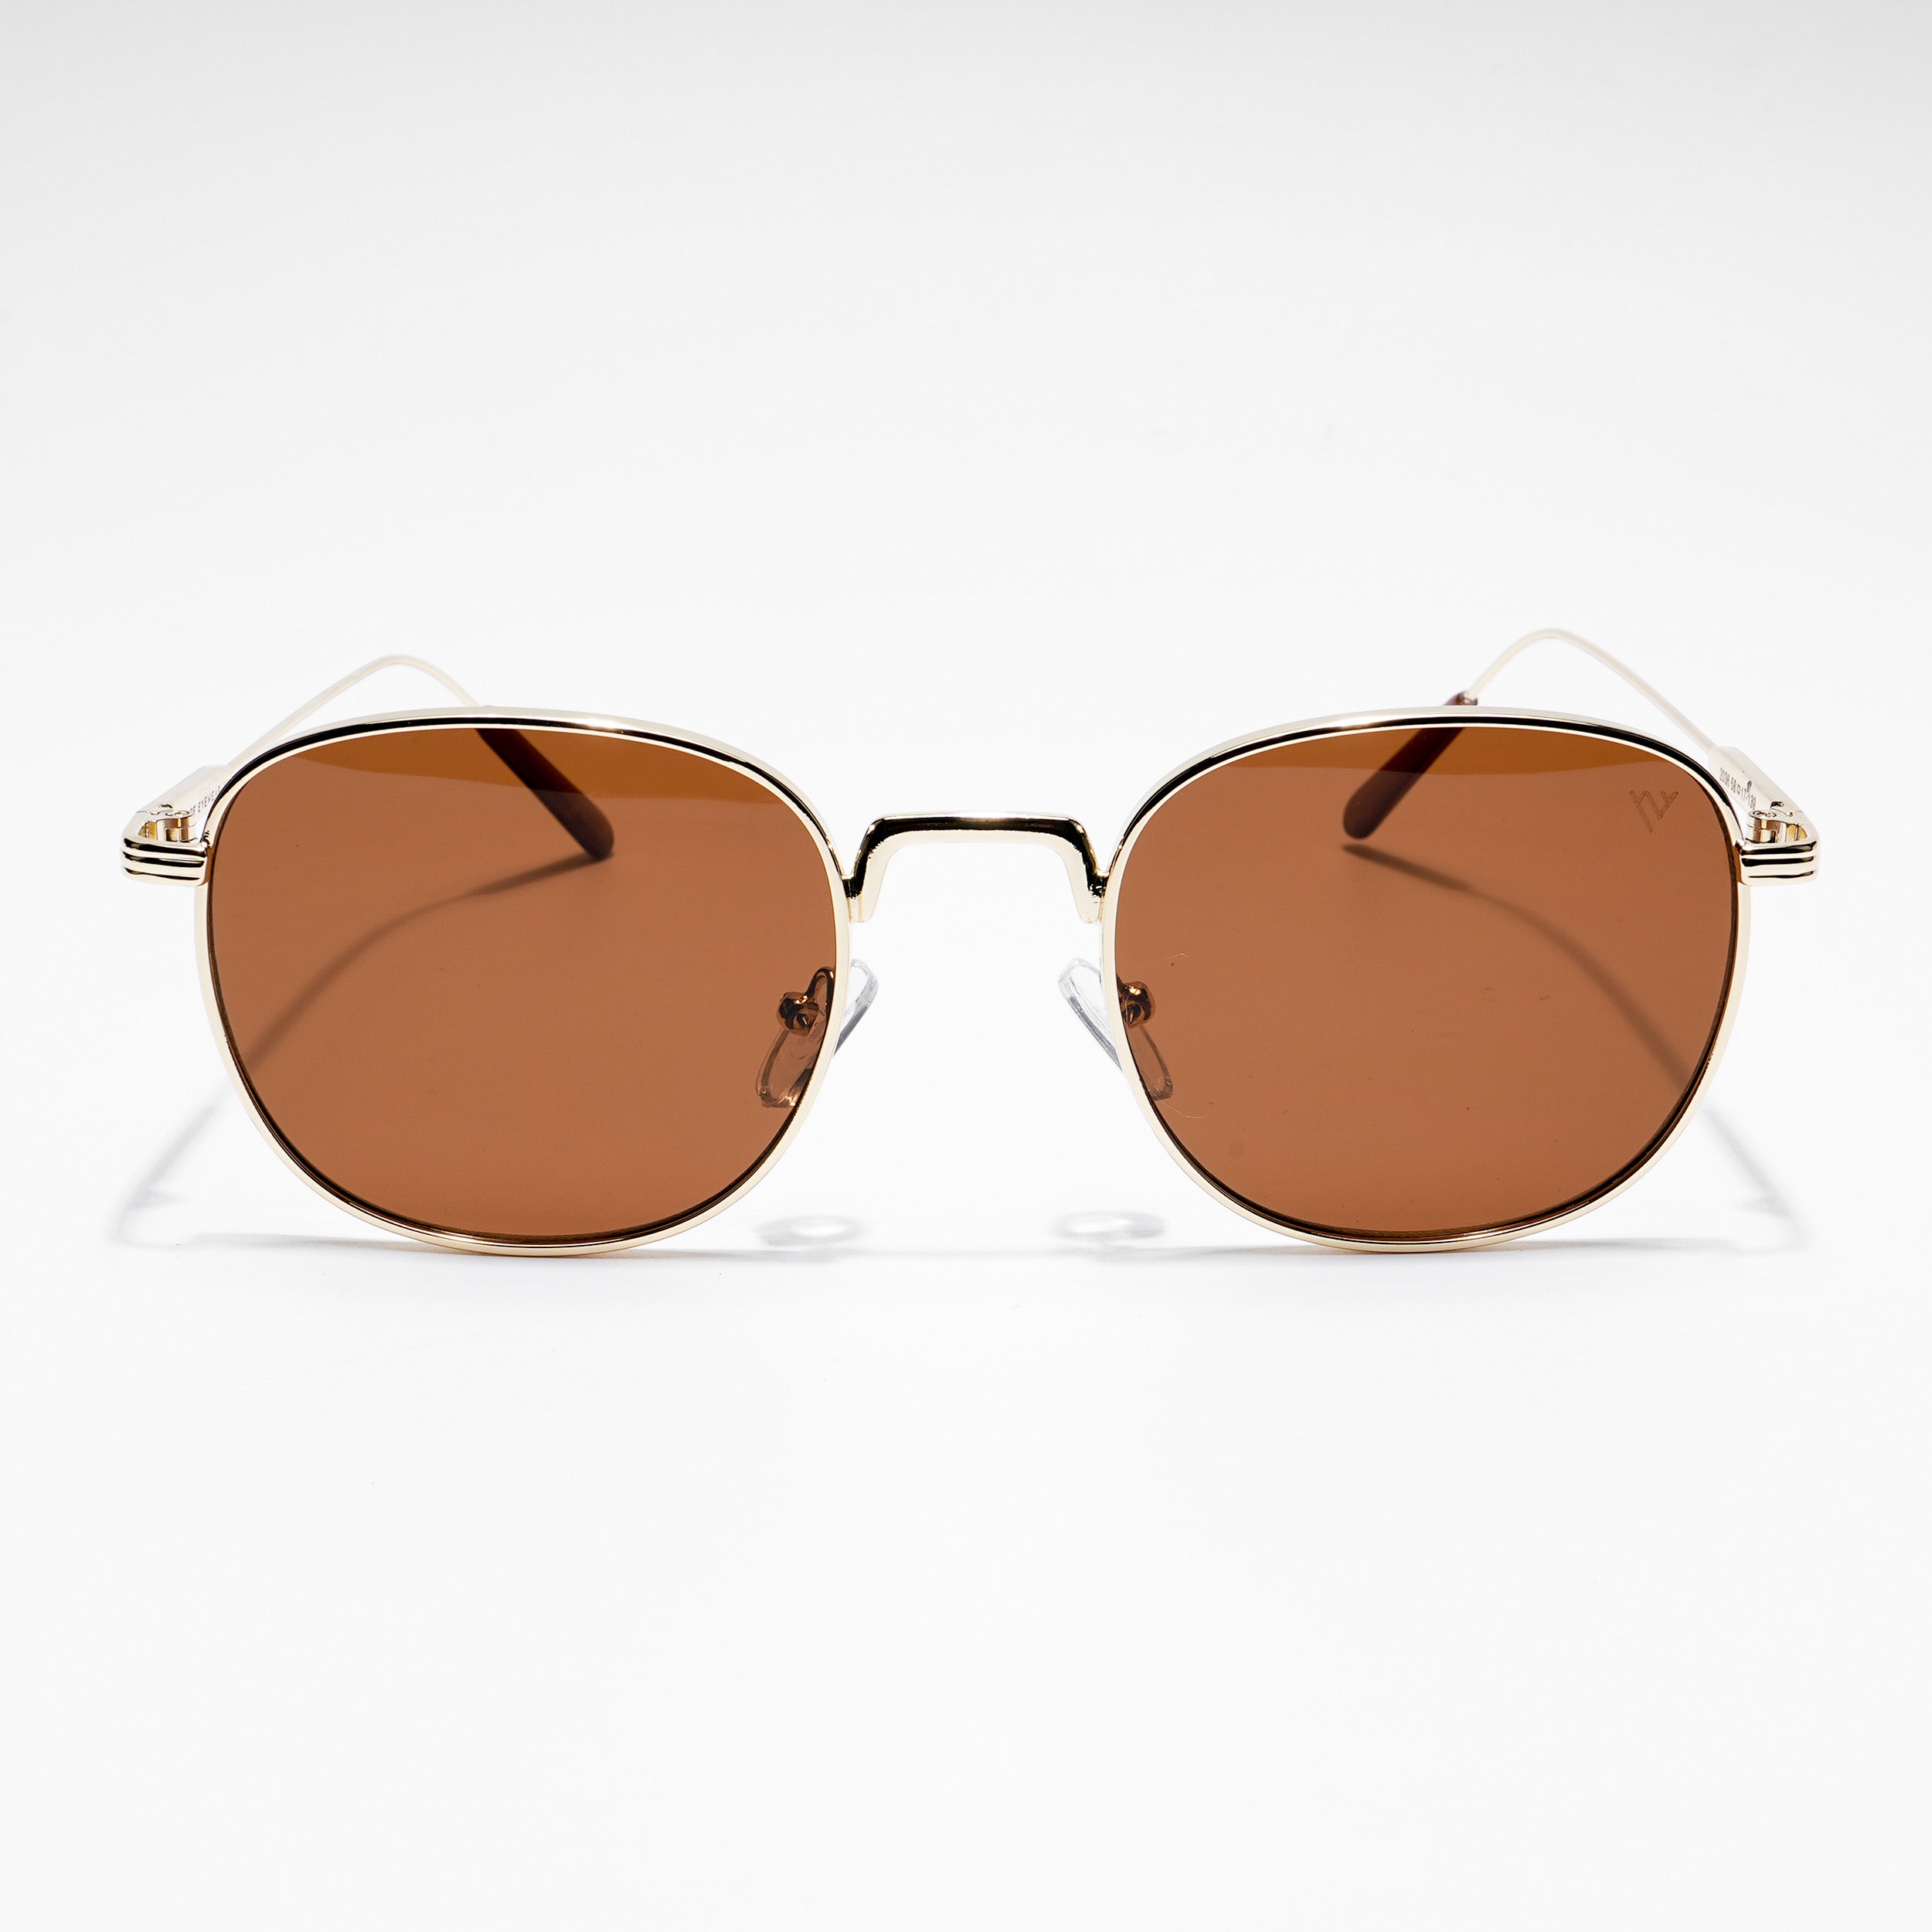 Voyage Brown-Gold Round Sunglasses MG2974